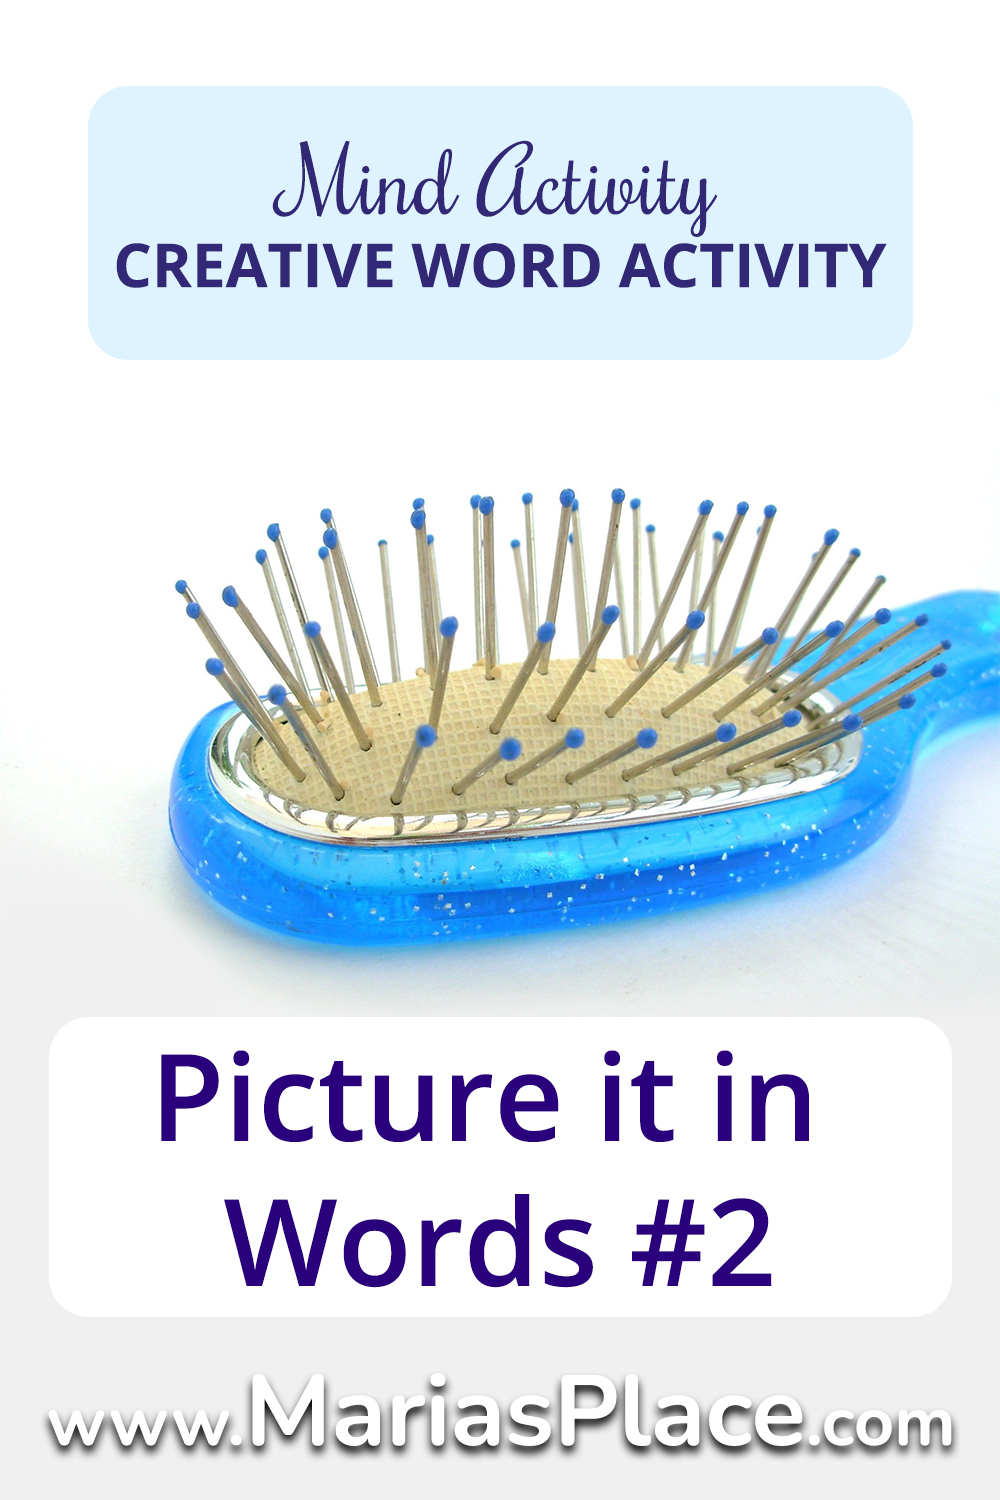 Tactile Activities, Picture it in Words #2